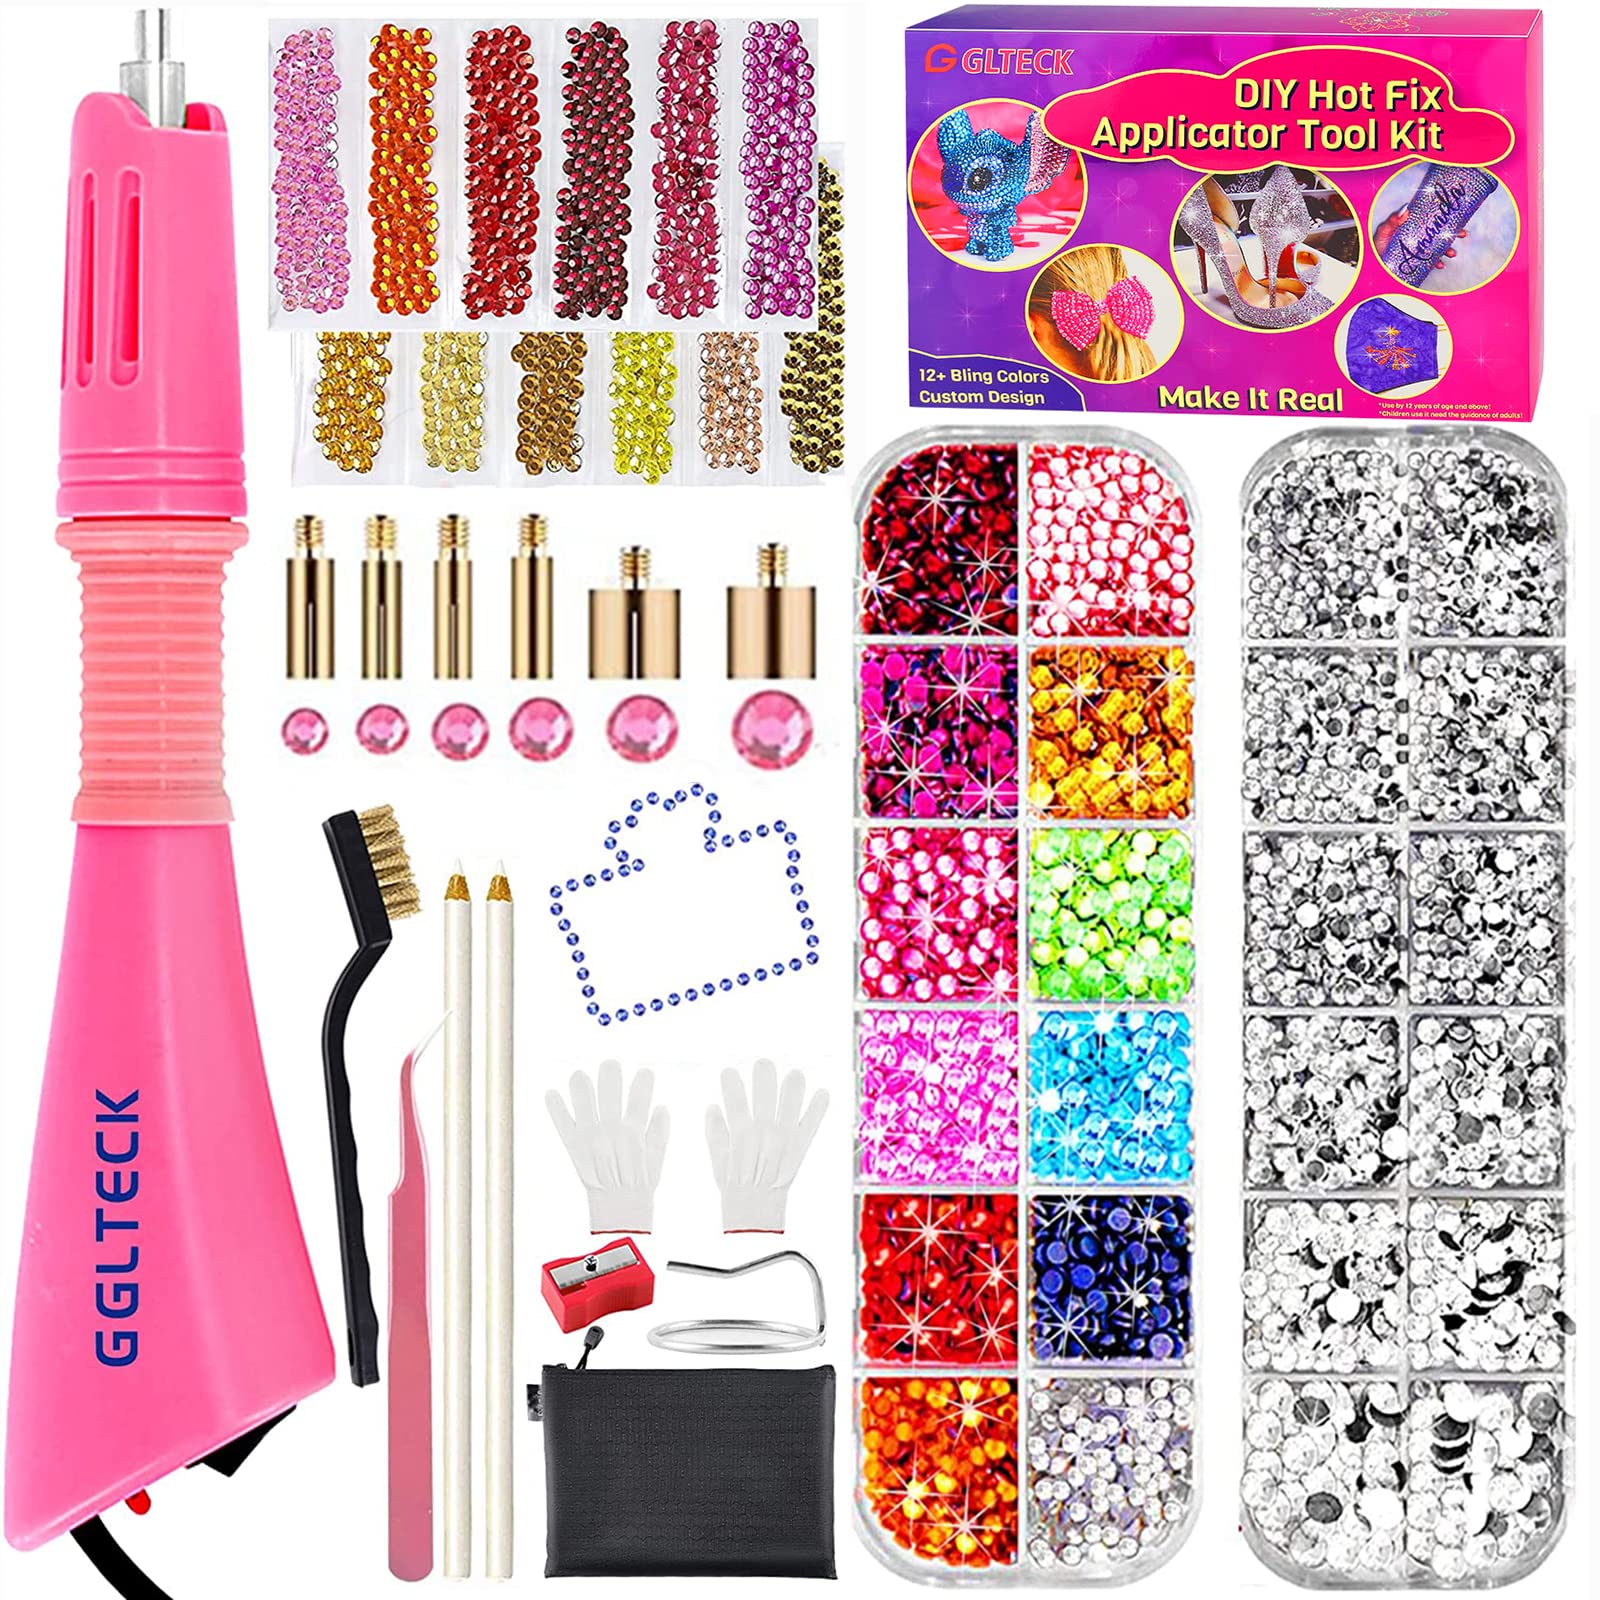 Hotfix Applicator, Bedazzler Kit with 5784 PCS Rhinestones for Crafts, DIY  Hot F